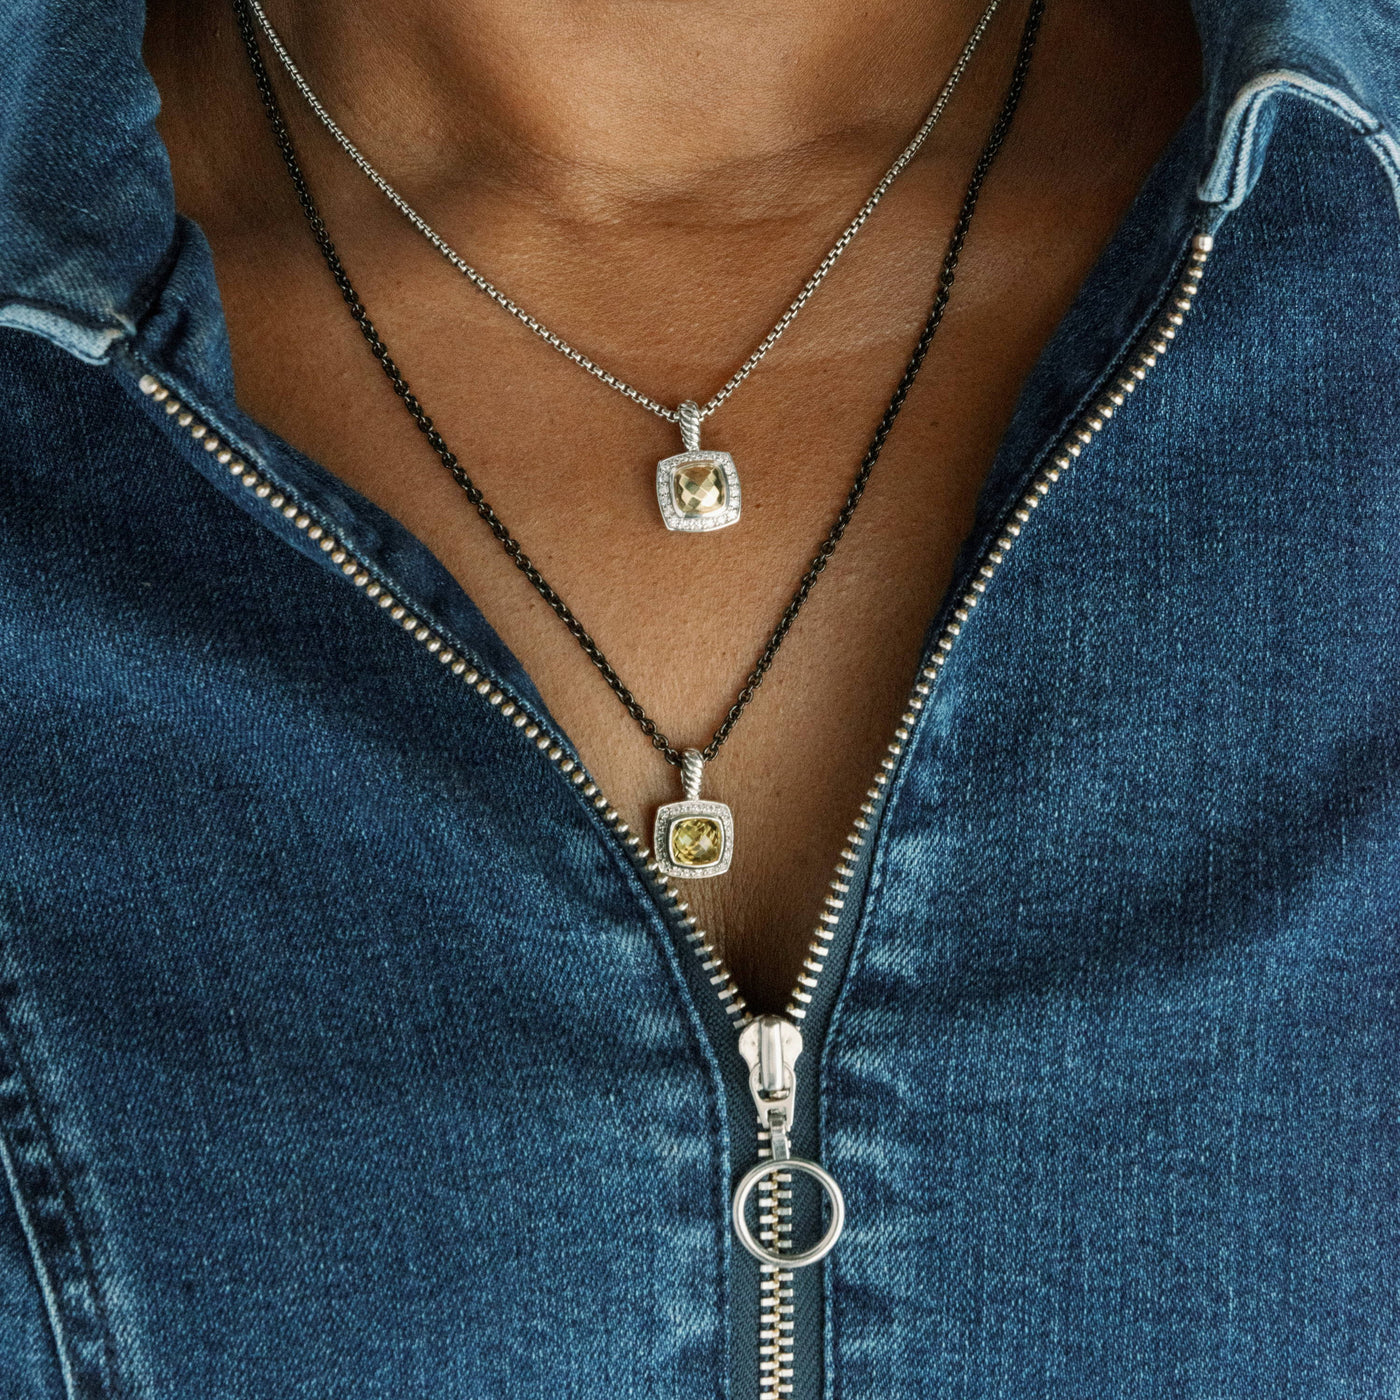 Woman wearing 2 layered citrine necklaces and a denim zippered shirt